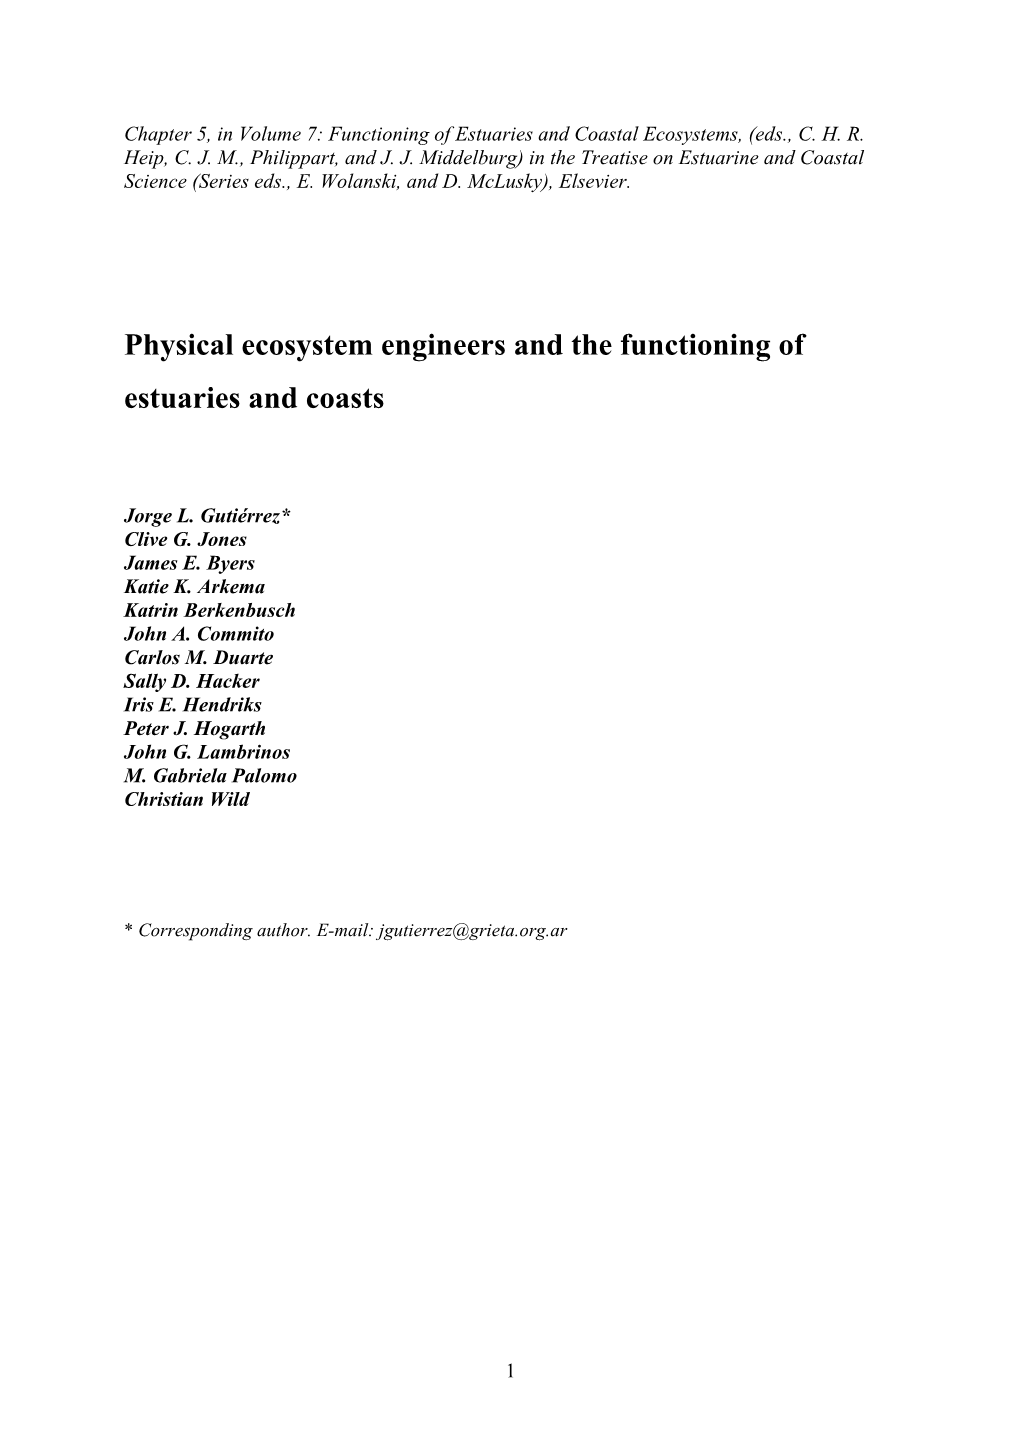 Physical Ecosystem Engineers and the Functioning of Estuaries and Coasts